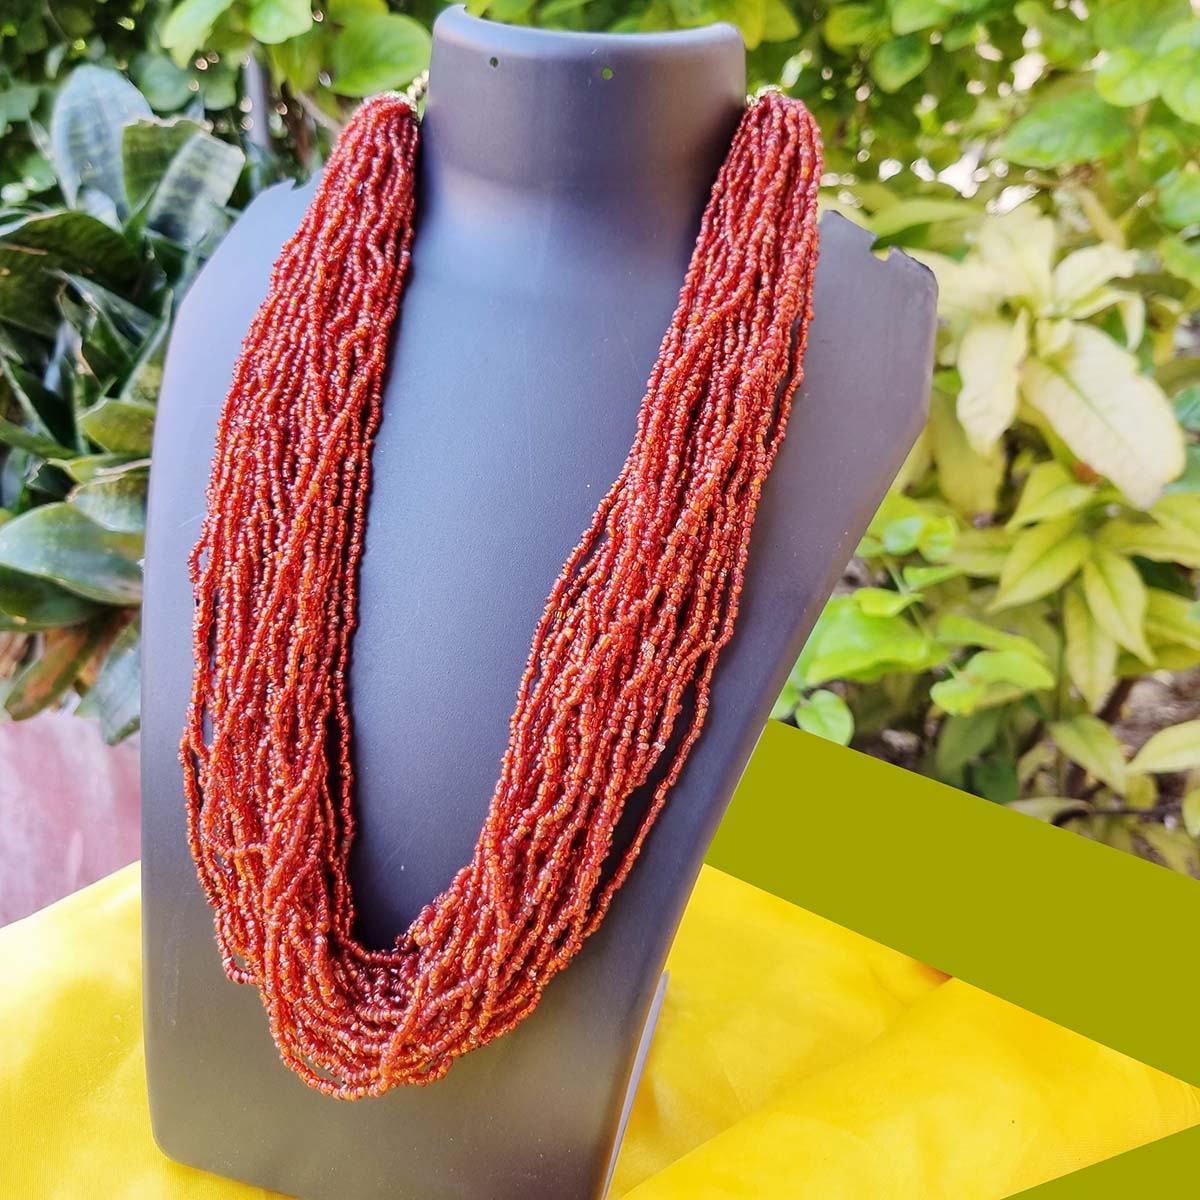 Red and orange beads necklace - urban junky's collections of jewellery